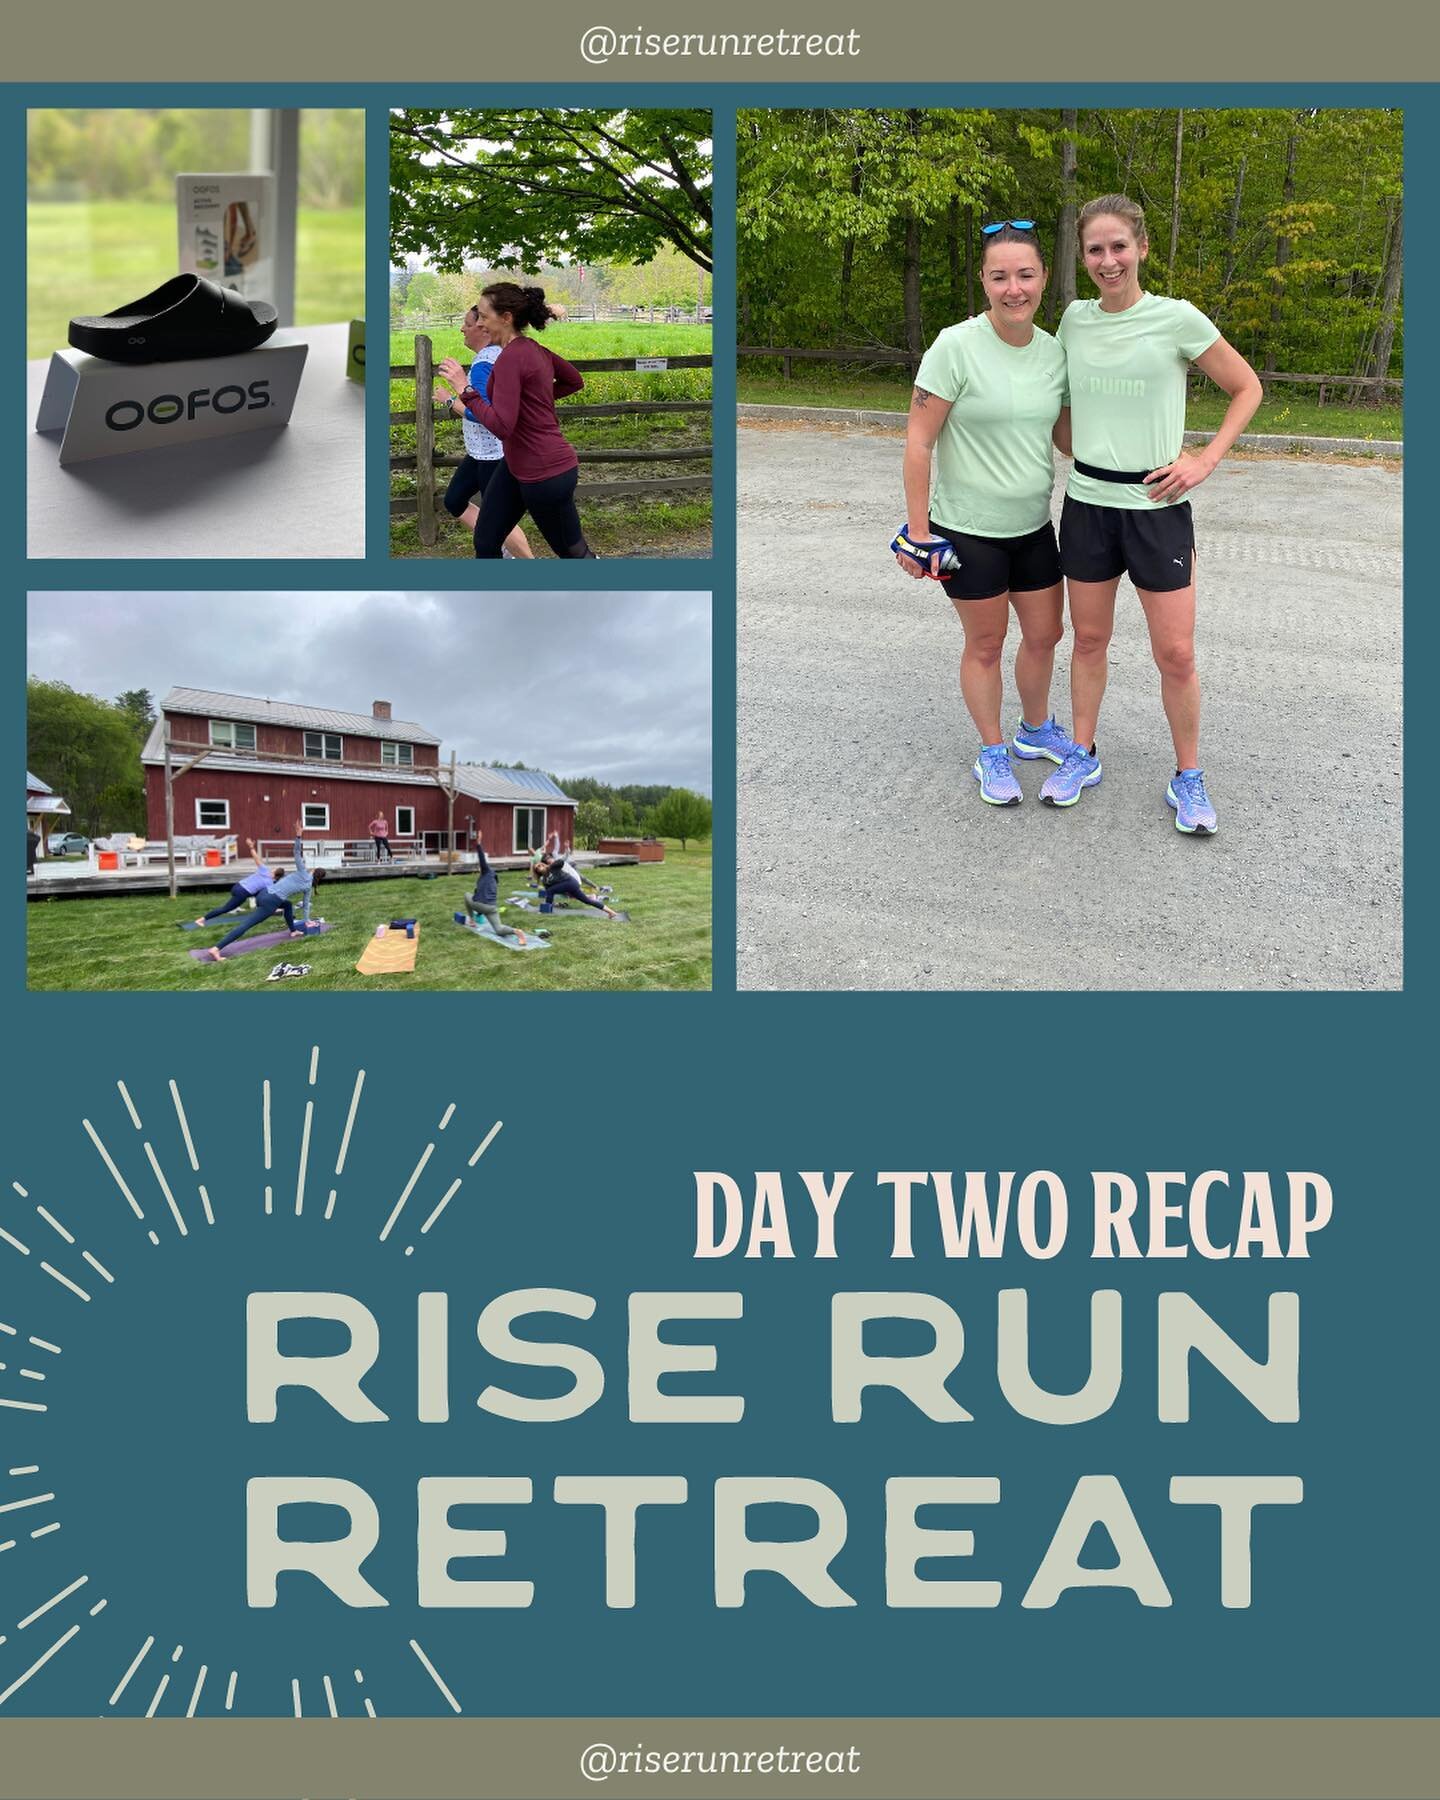 Spring Retreat Day 2 Recap:

Running
Laughter
Delicious Food
Vinyasa Flow
@oofos recovery demo
Connection 
Tears
Reset

So many great things happened today, what a day! #makingmemories #womensrunning #womensretreat #runningretreat #womensrunningcommu